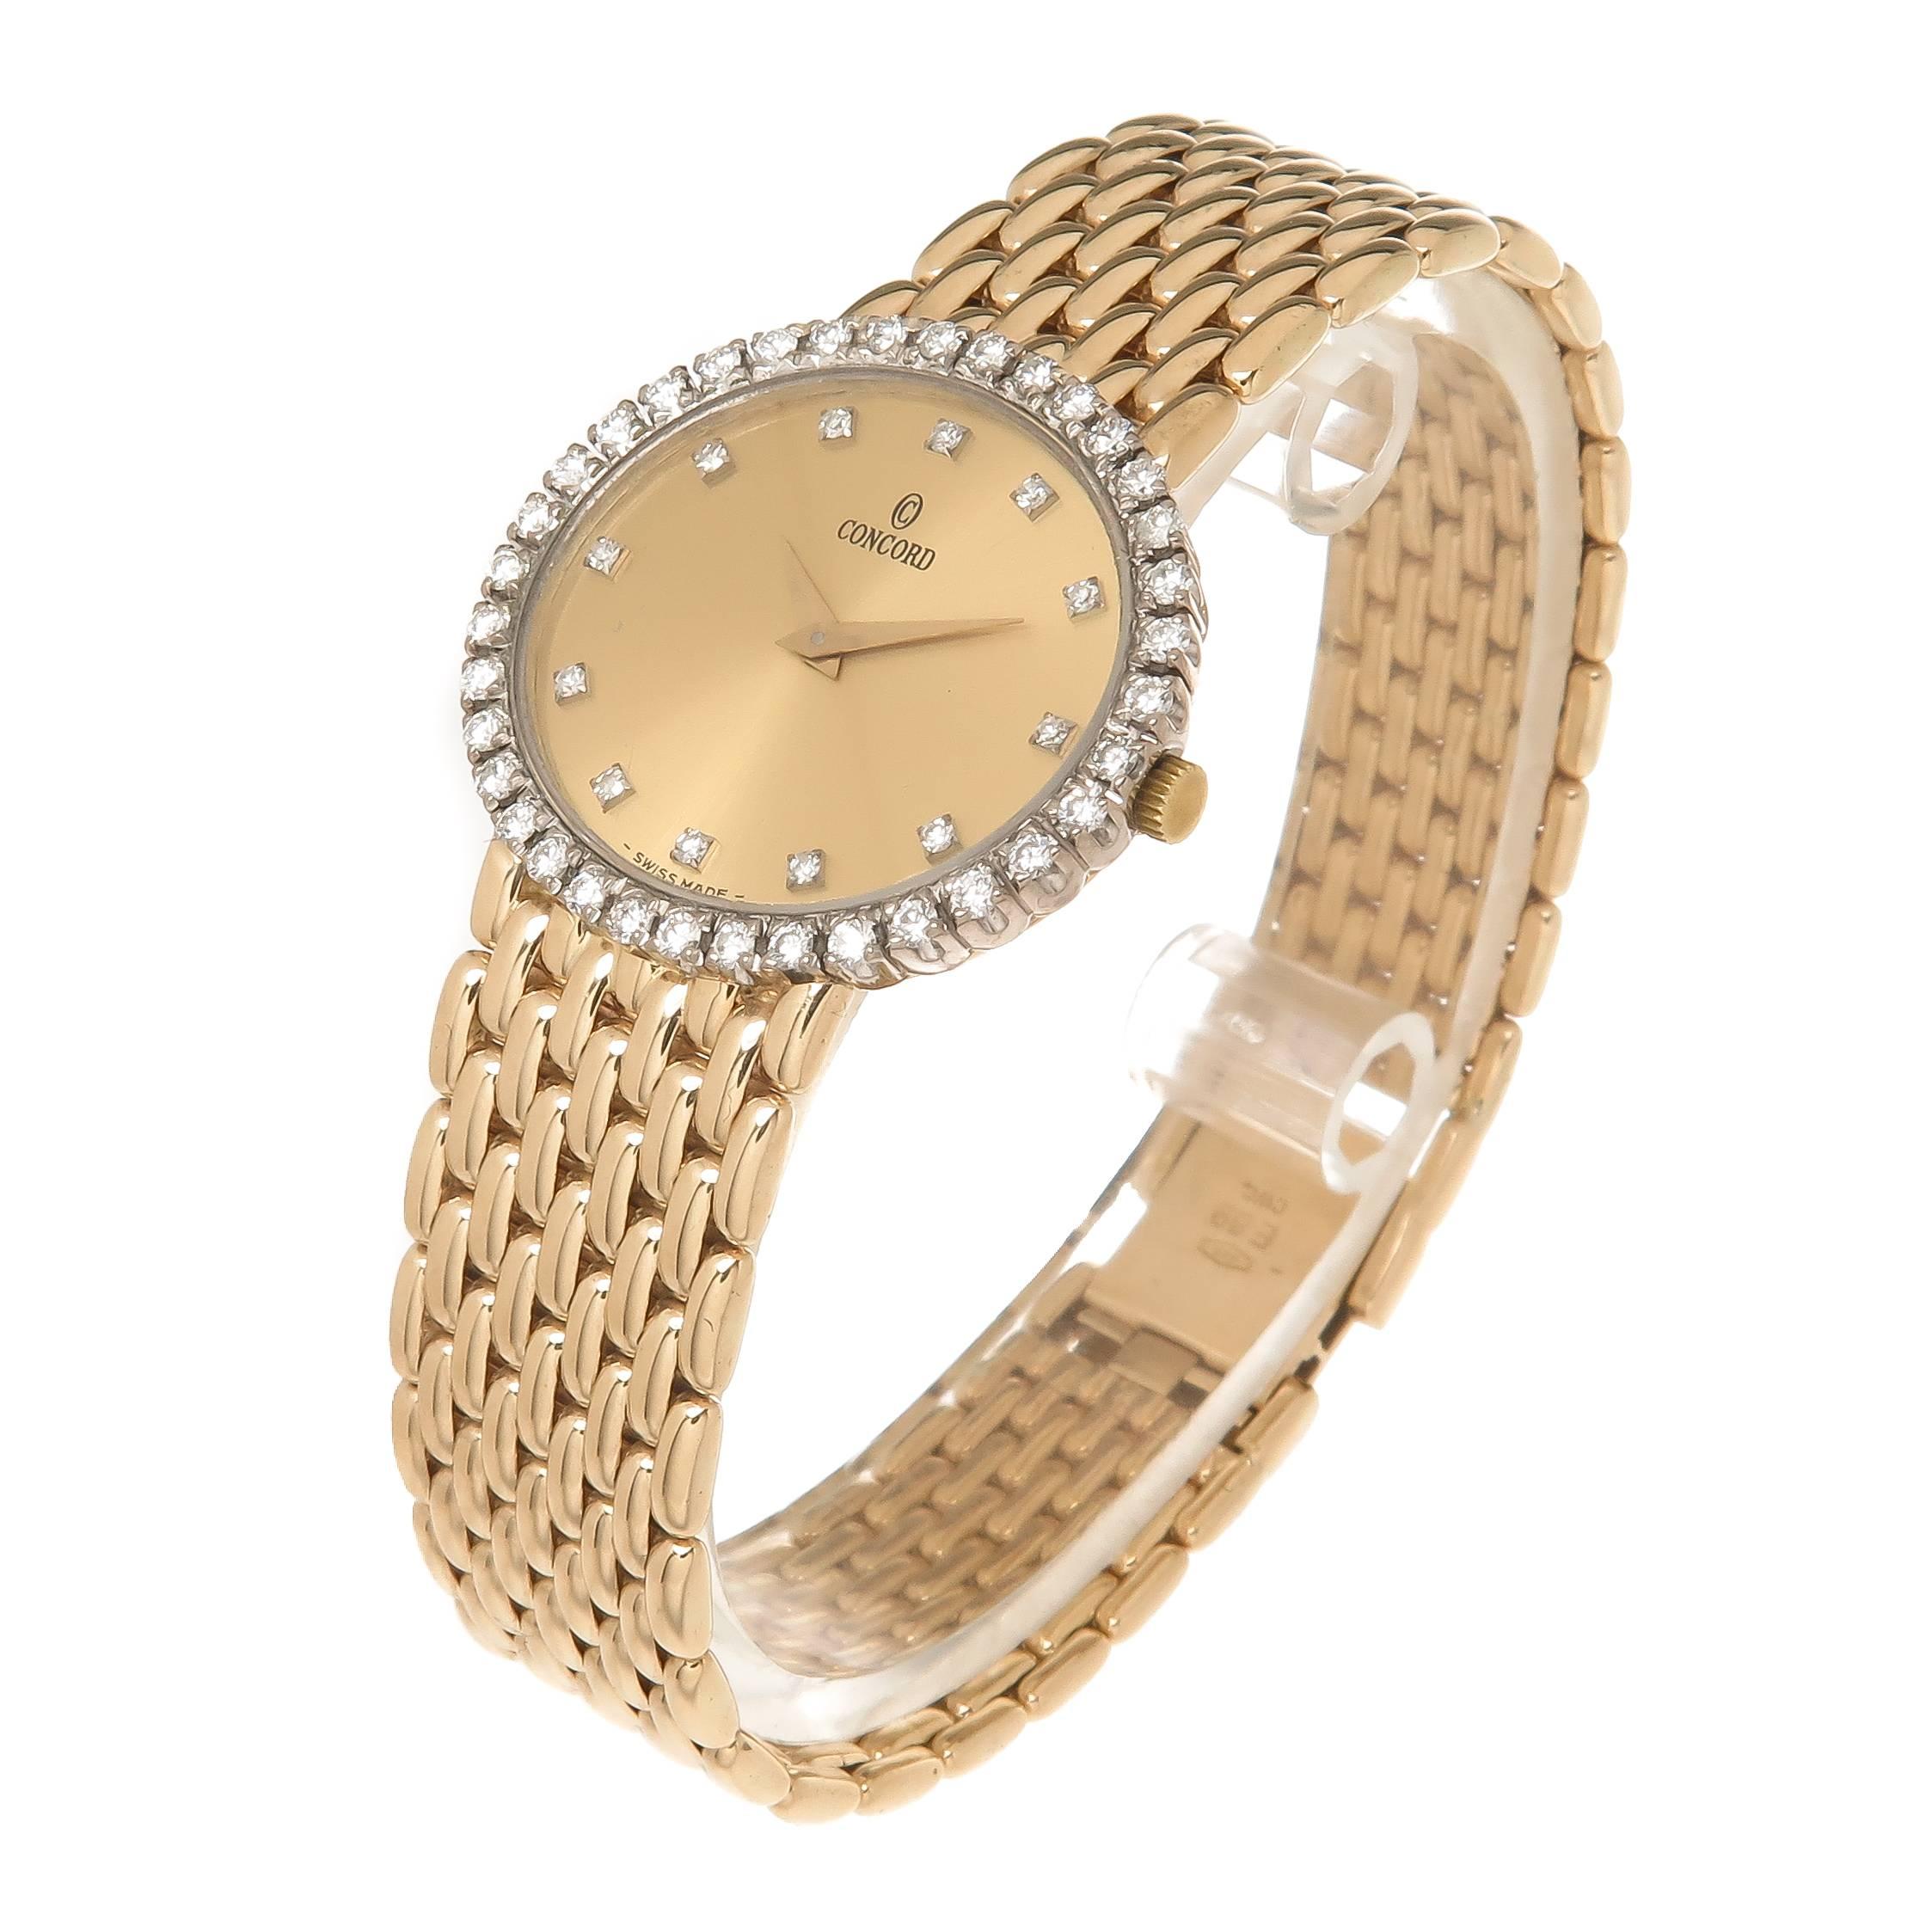 Circa 1990 Concord 14K yellow Gold Ladies watch, Water Resistant Case measuring 1 X 7/8 inch and attached to a Yellow Gold Link Bracelet measuring just over 1/2 inch wide. Total Length 6 7/8 inch. Quartz Movement, Gold Dial with Diamond set Markers.